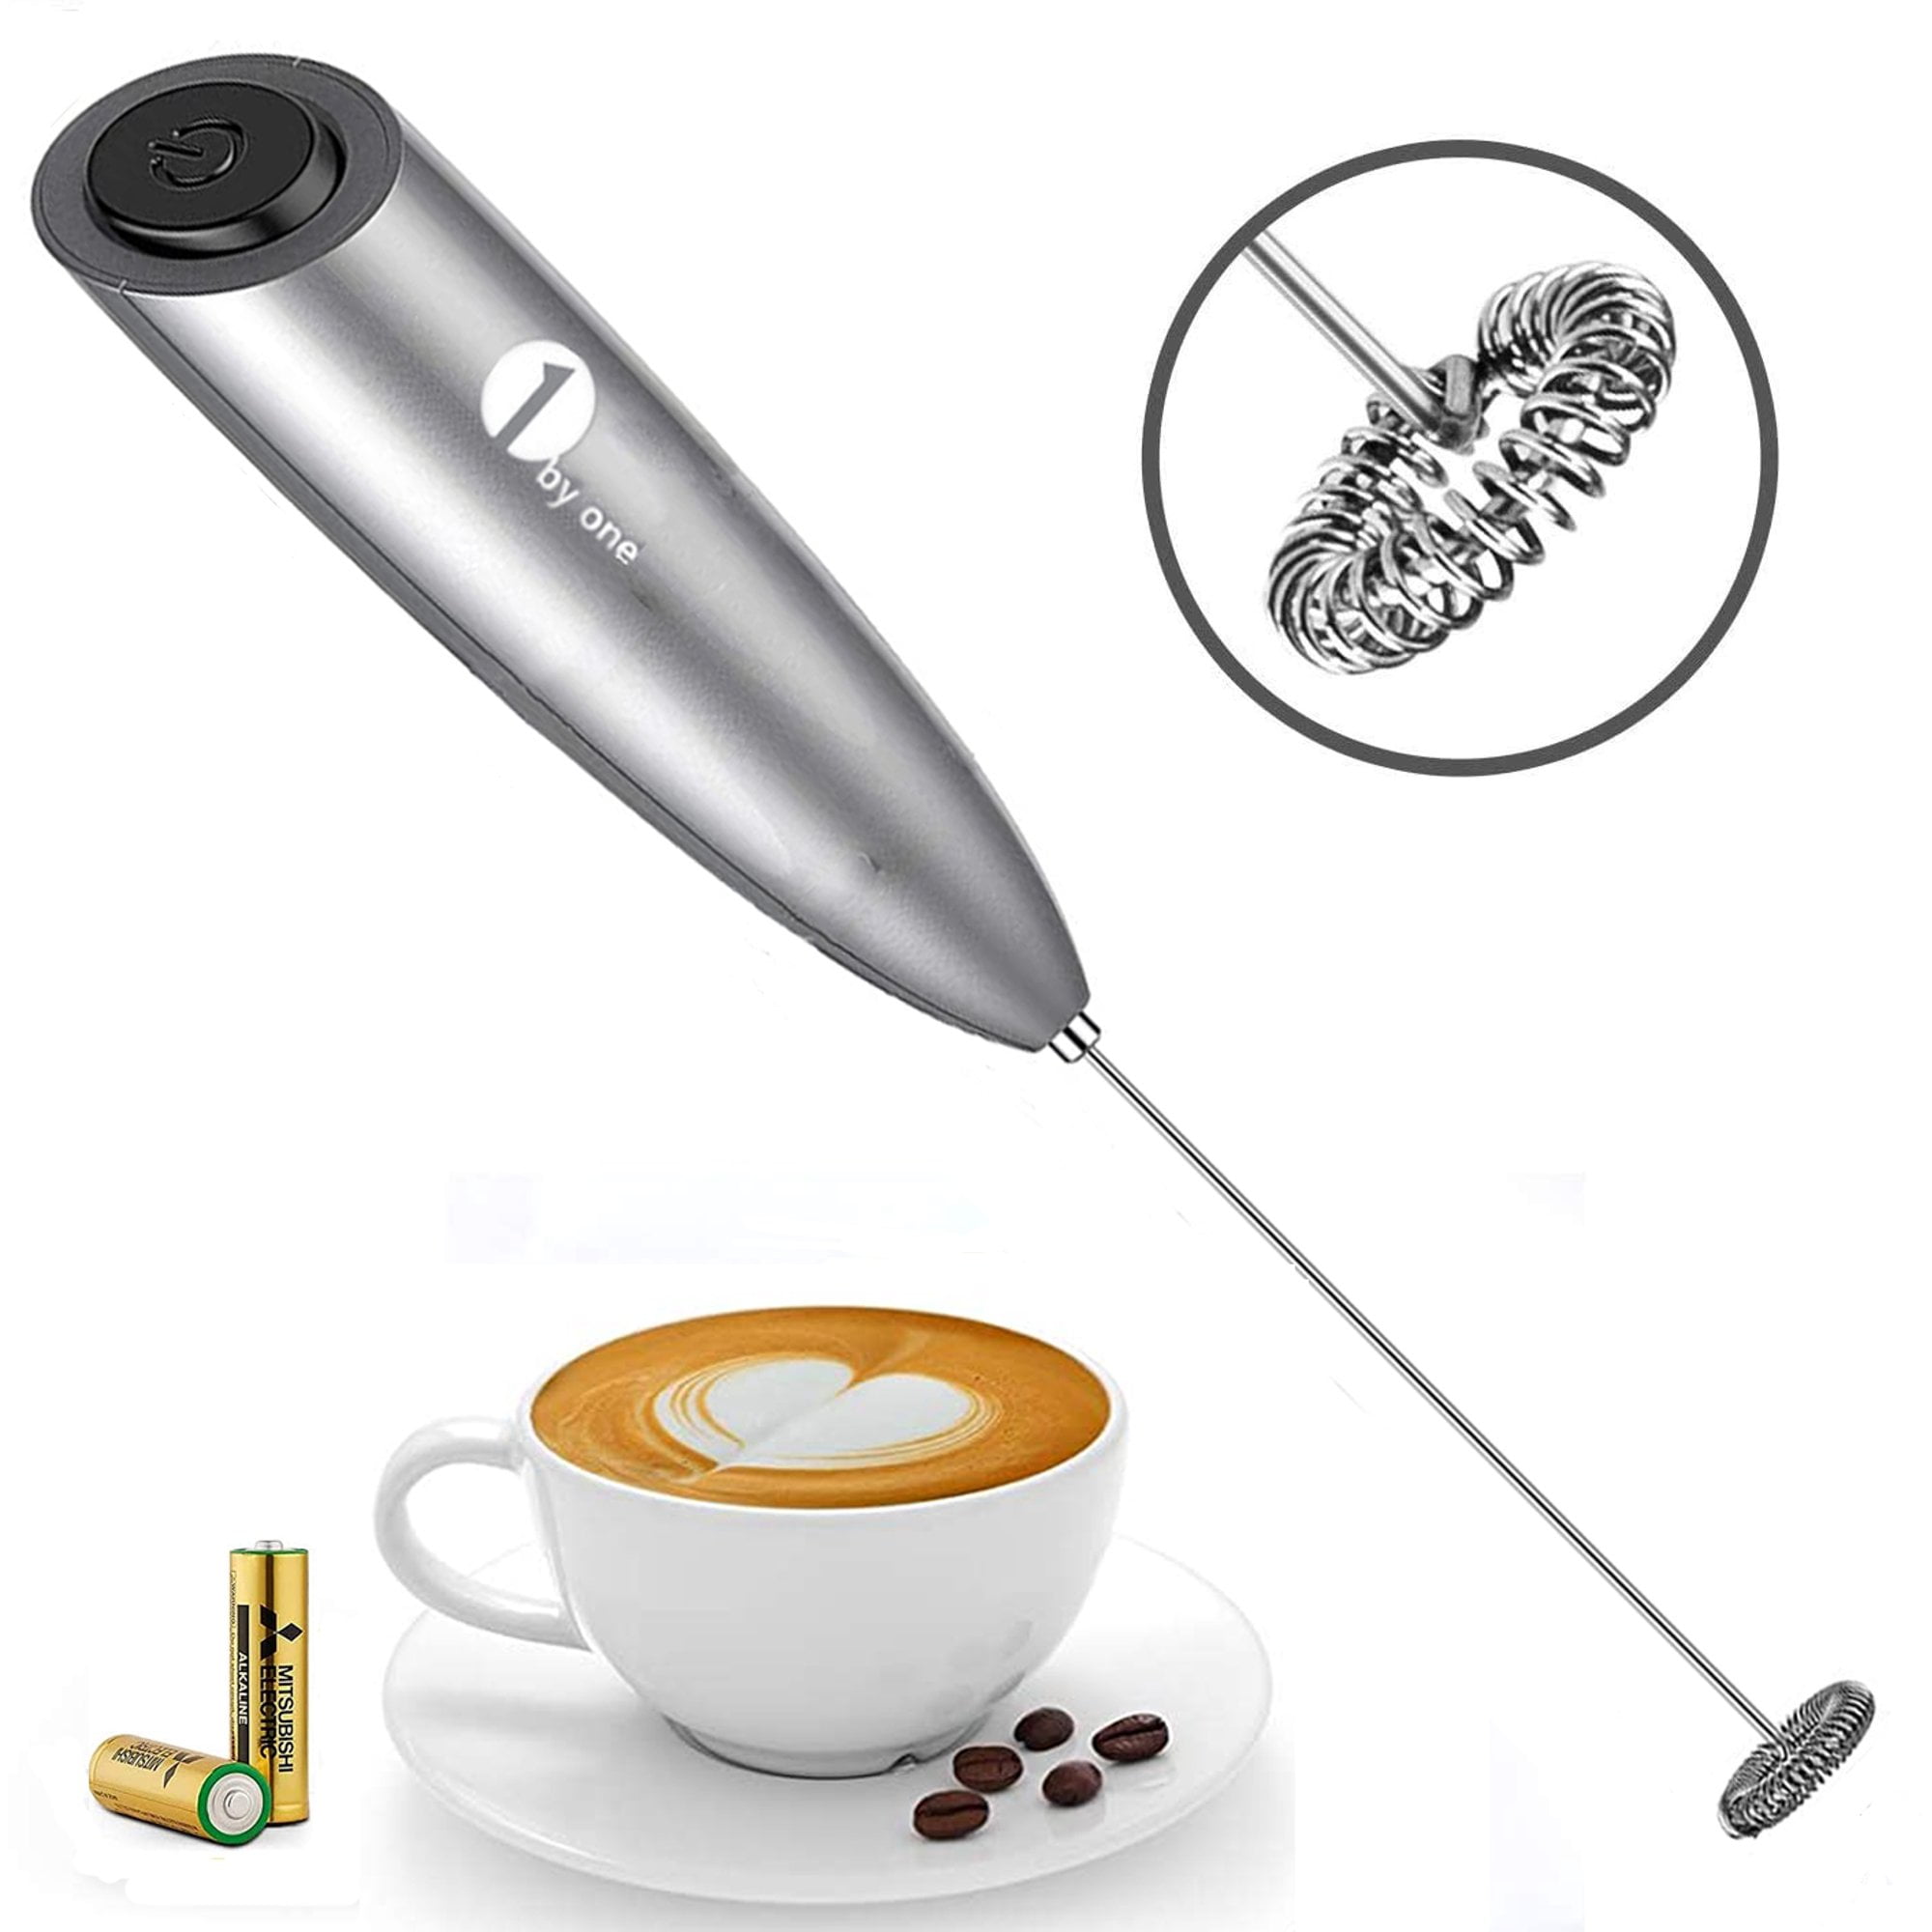 Milk Frother Handheld Battery Operated Electric Foam Maker, Drink Mixer  with Stainless Steel Whisk and Stand for Cappuccino, Bulletproof Coffee